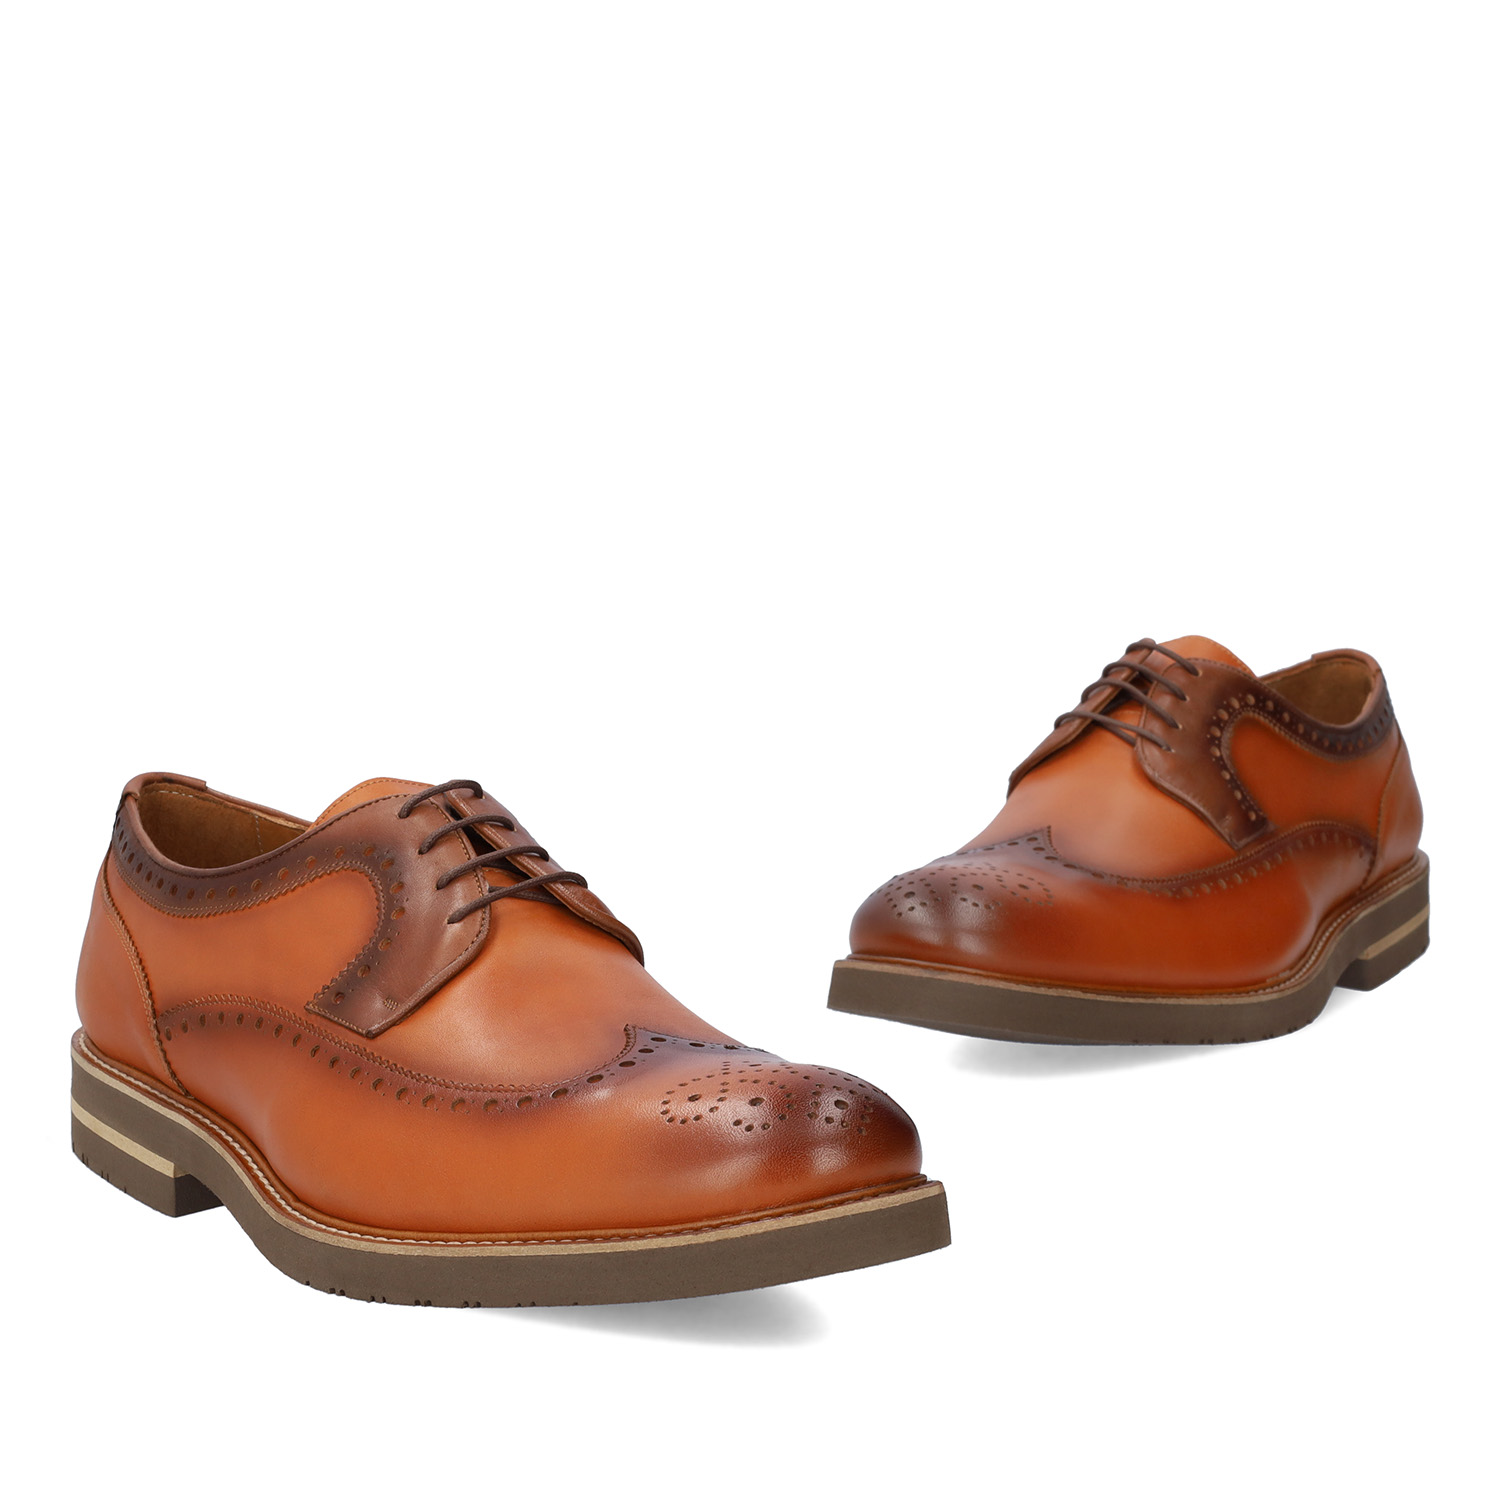 Chaussures Style Oxford couleur Cuir 